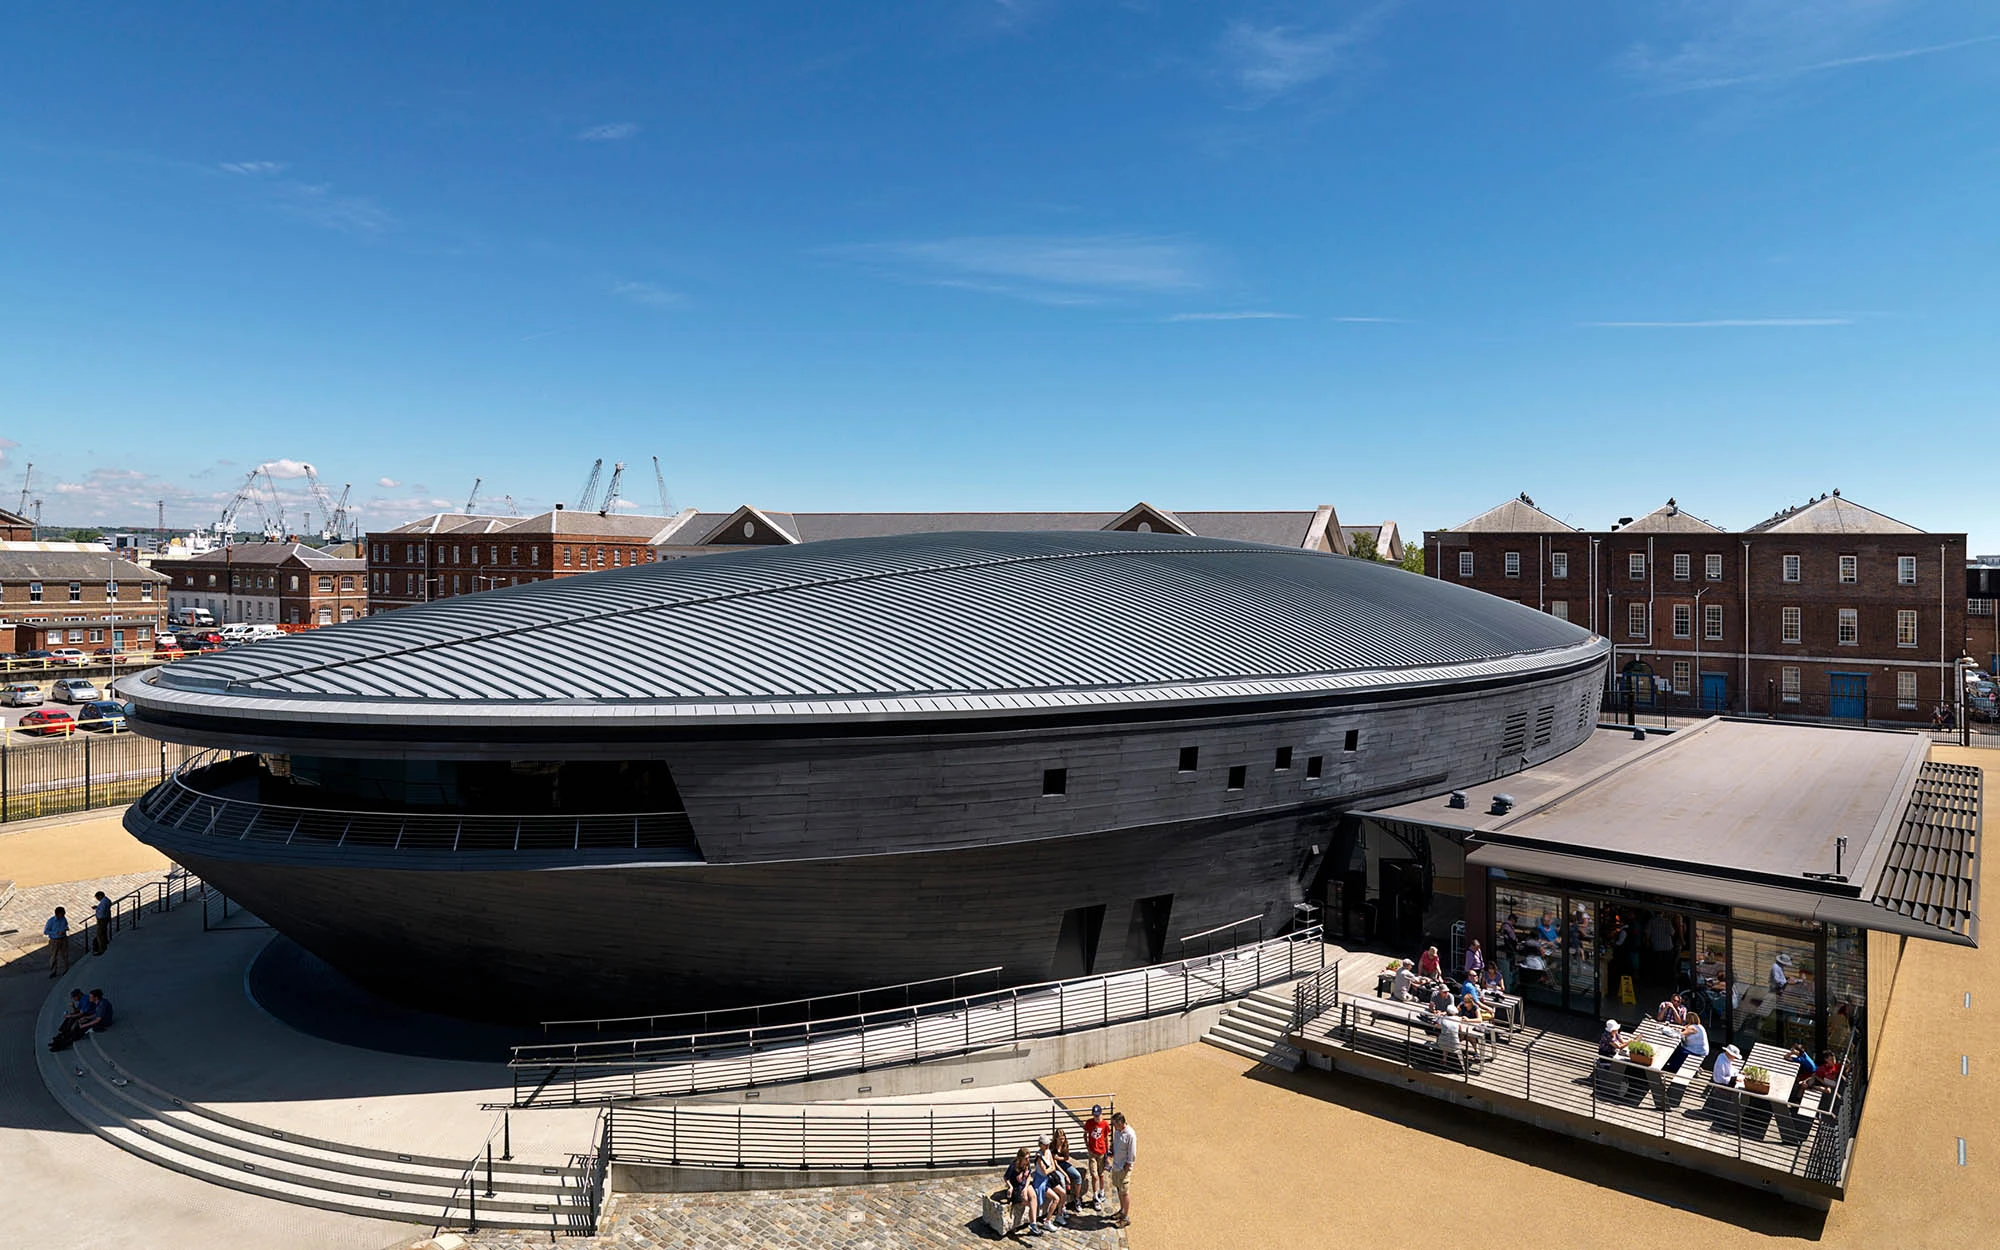 Exterior of Mary Rose Museum